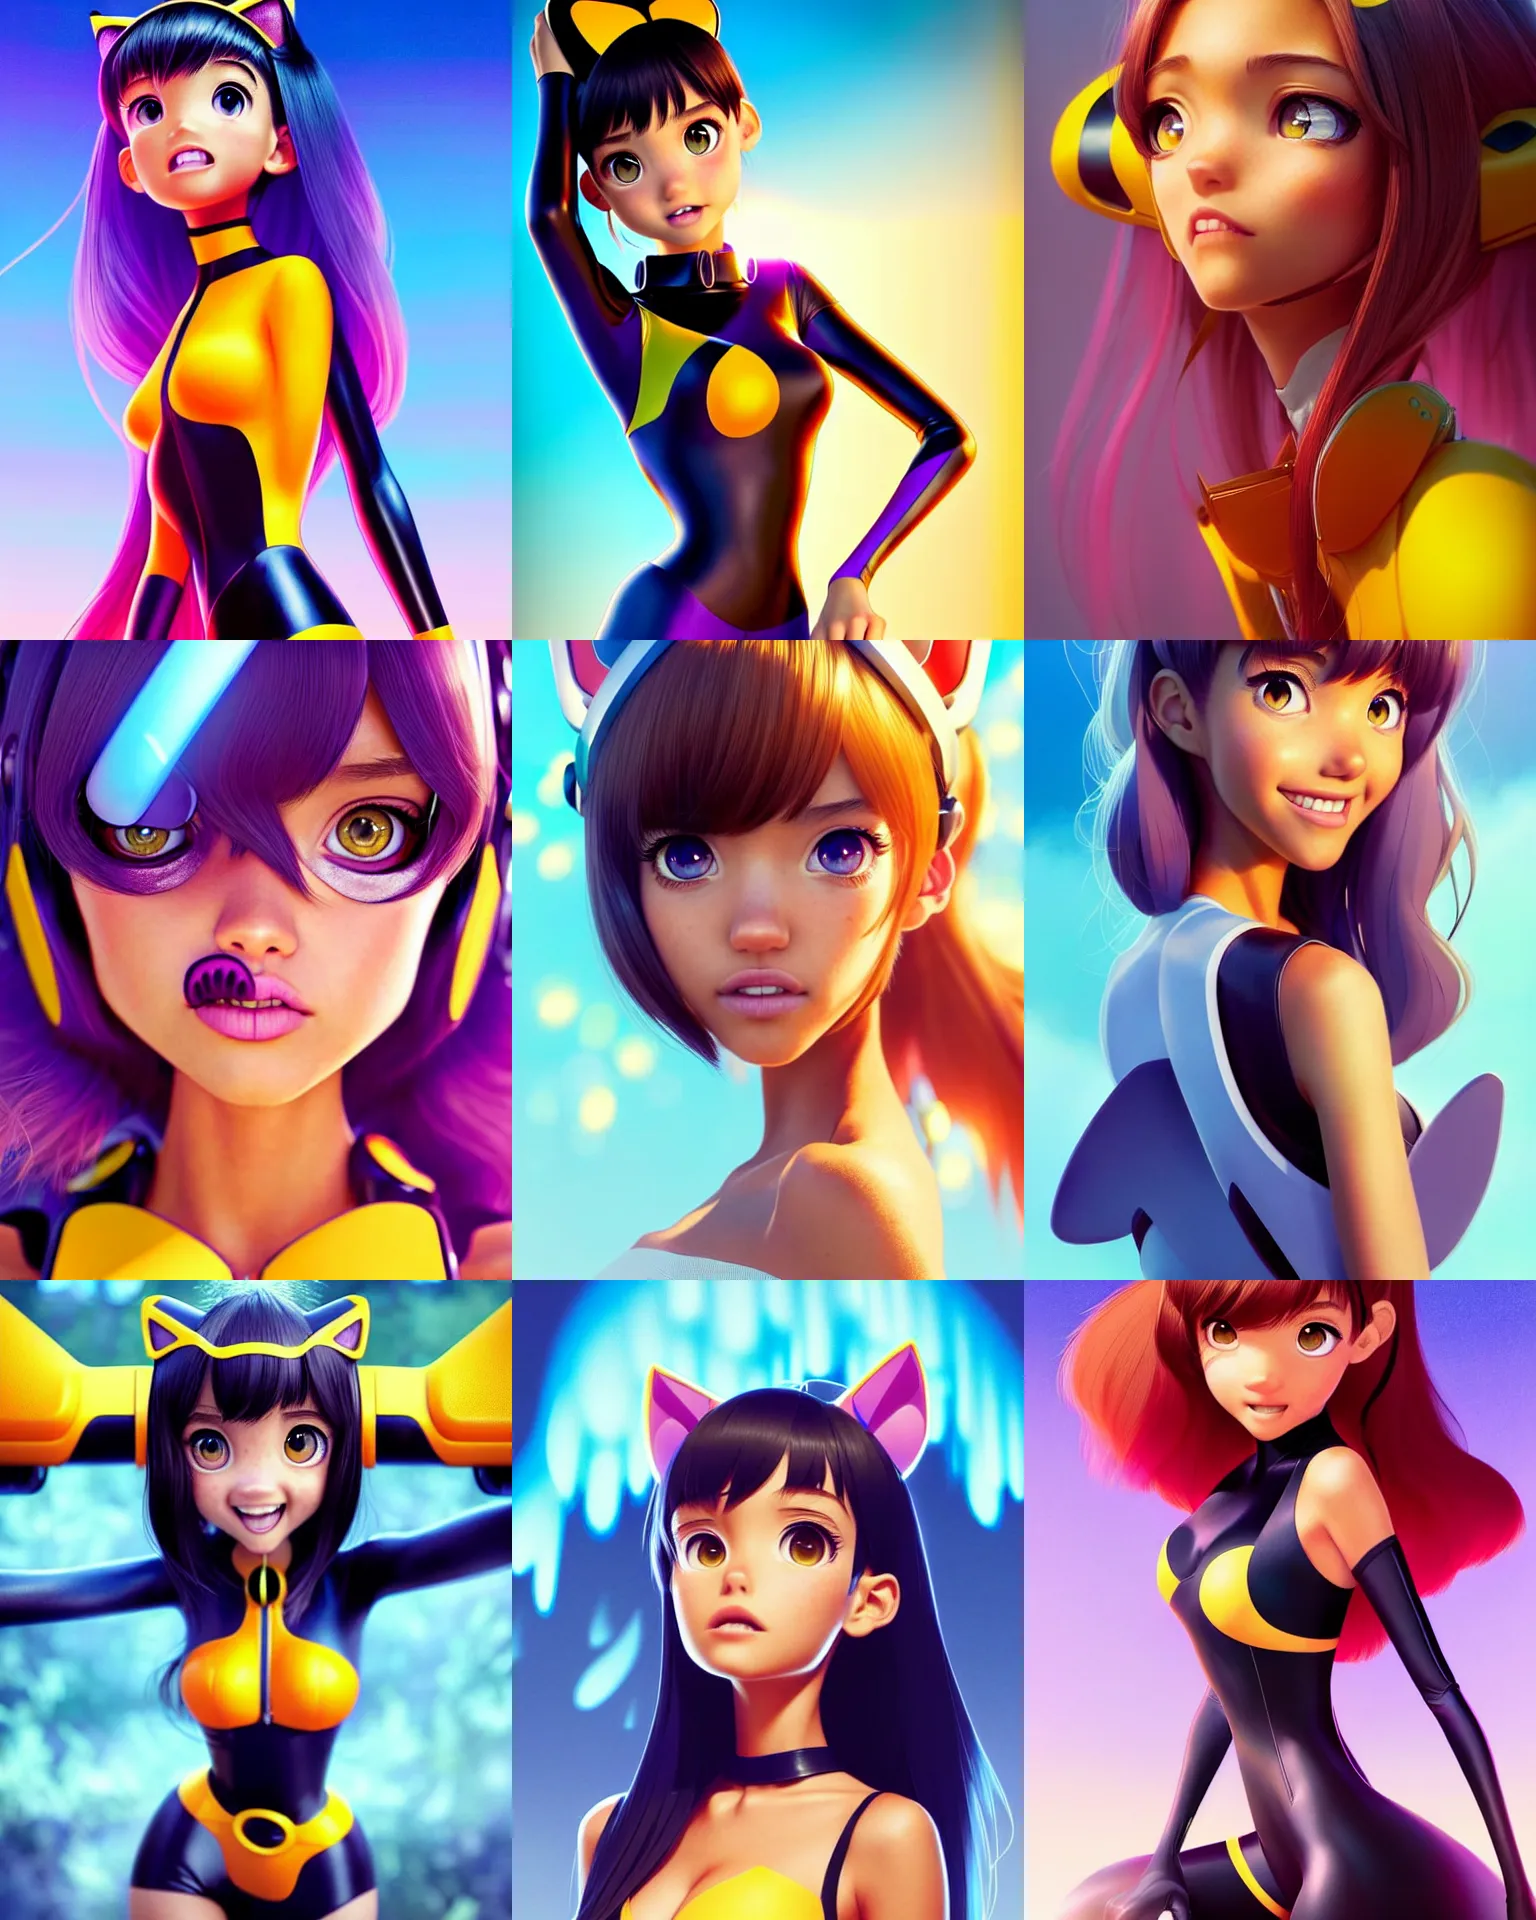 Prompt: pixar anime movie poster portrait photo : : of jessica alba, madison beer : : as catgirl bumblebee cyborg by weta : : by wlop, ilya kuvshinov, rossdraws, artgerm, artstation, unreal engine : : rave makeup, pearlescent, sweaty, morning, vogue cover : :